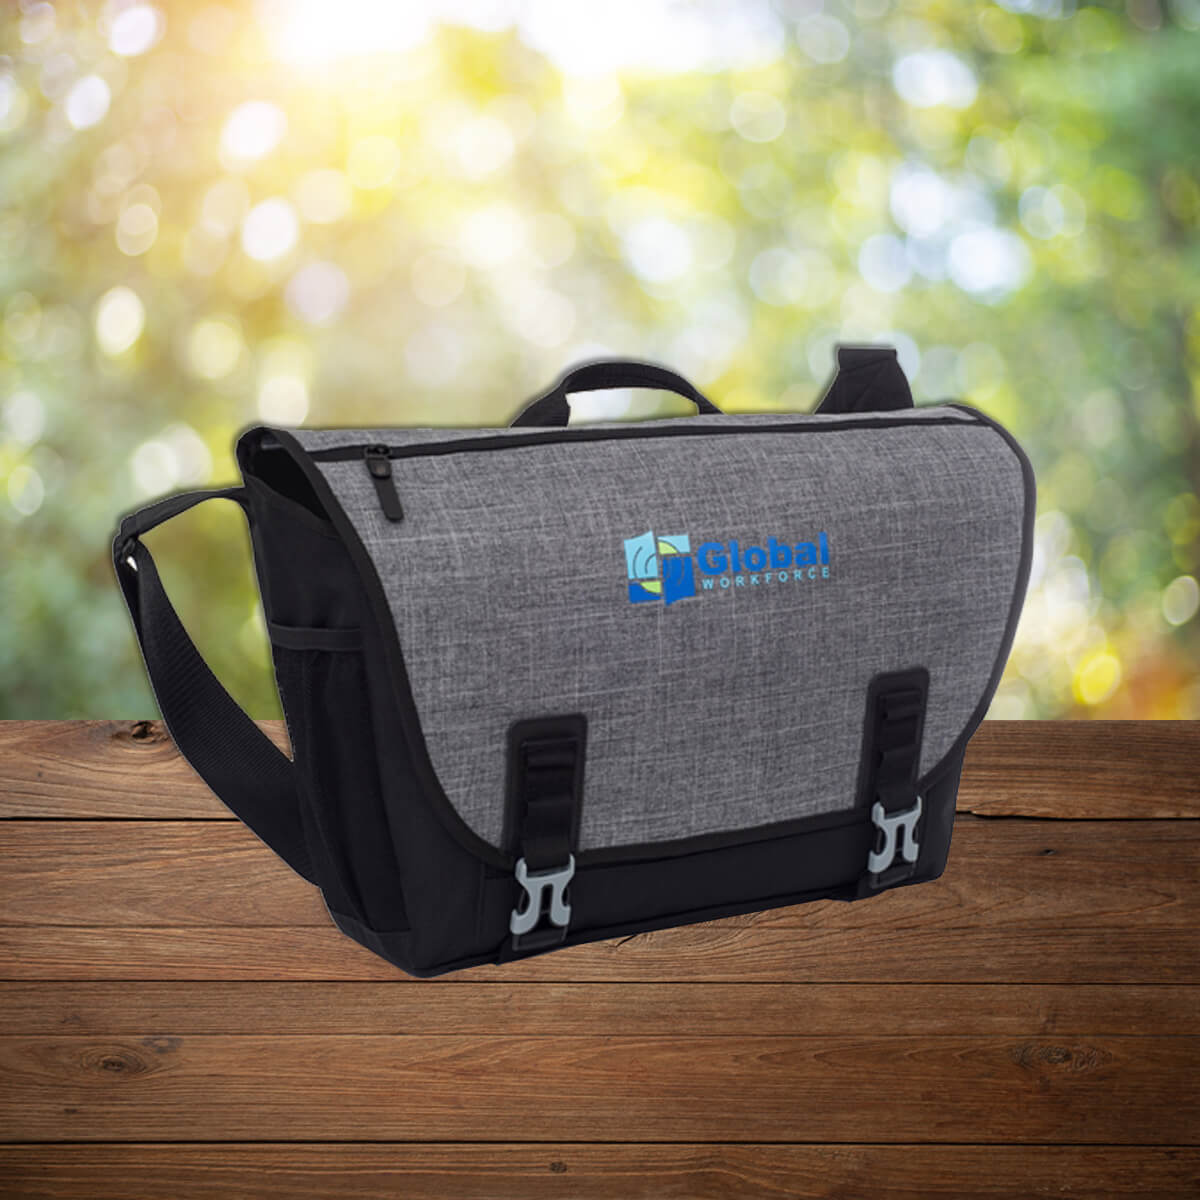 Black and grey clip custom promotional messenger bags by curative printing